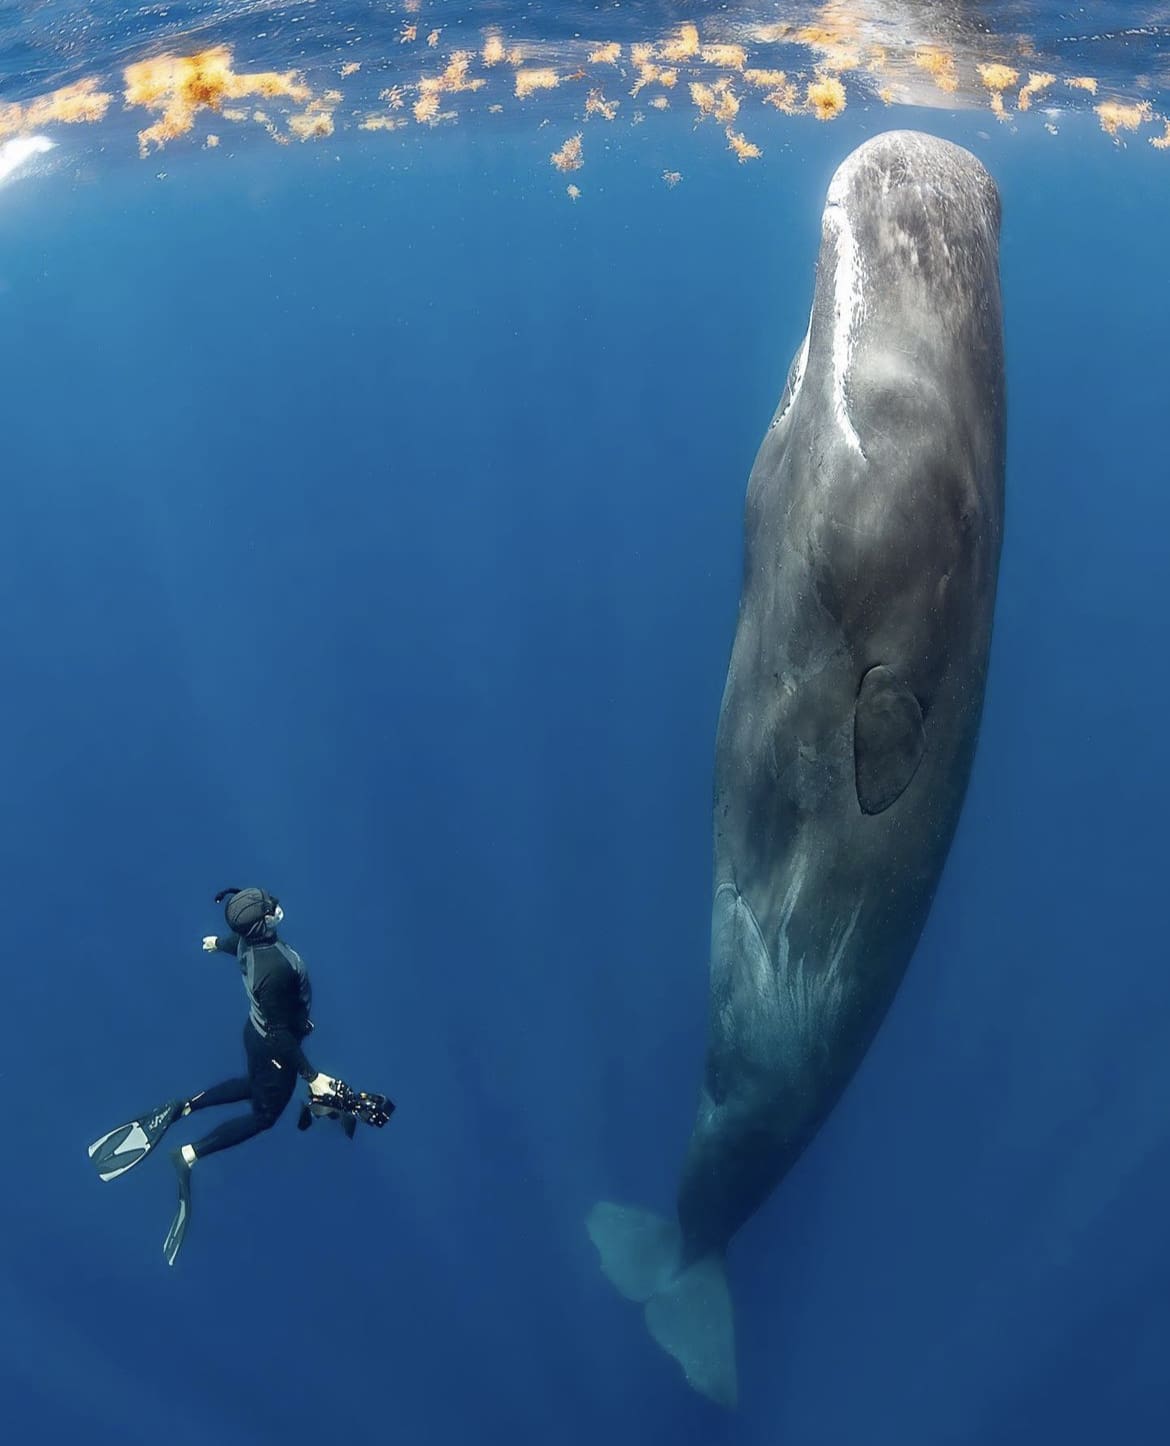 Spending time underwater with Sperm Whales